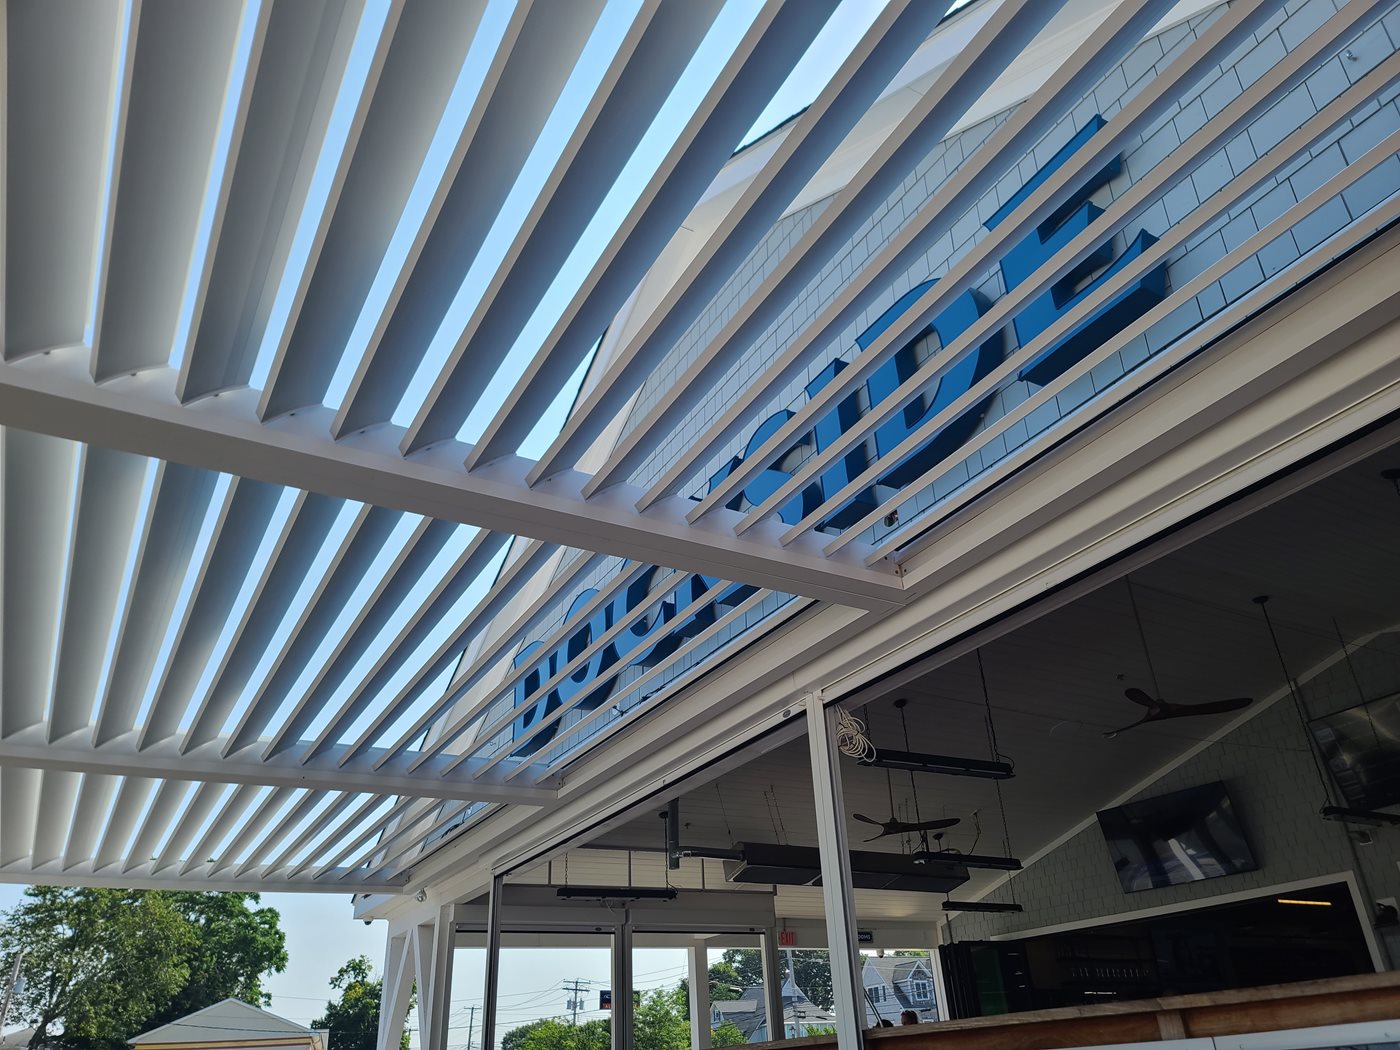 Multiple-Albas-at-Dockside-Seafood-Grill-in-Branford,-CT-by-New-Haven-Awning-(3).jpg